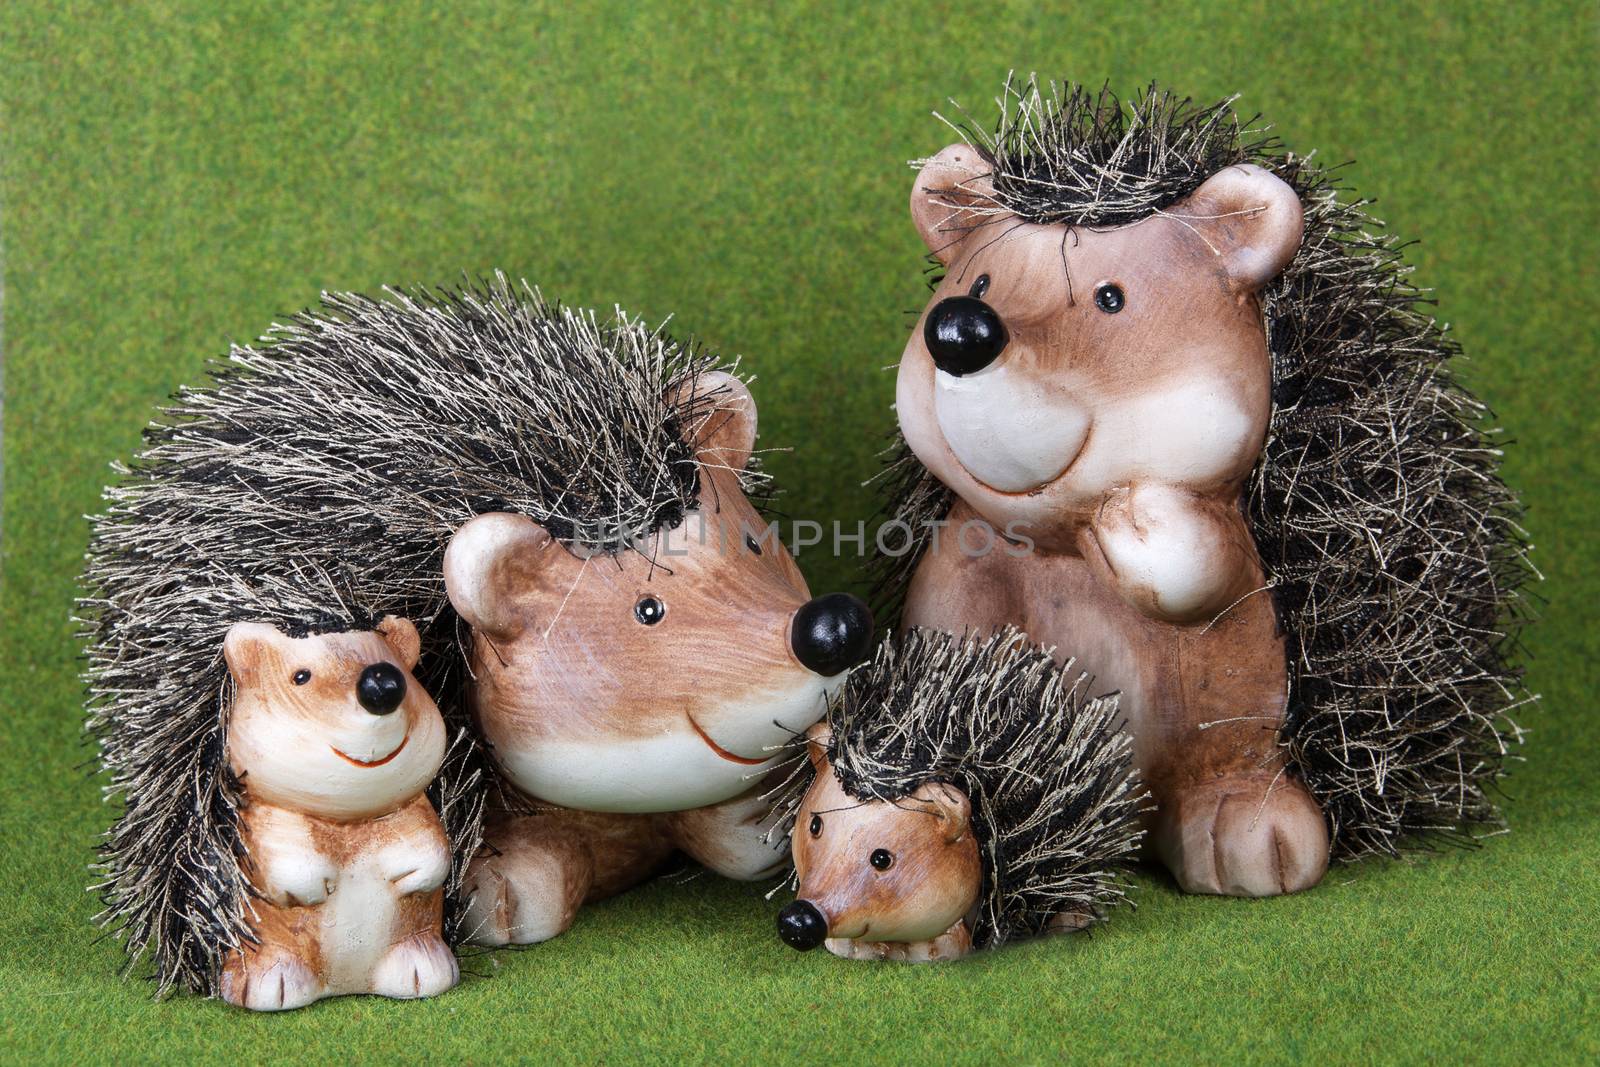 A family of cute toy Hedgehogs together on grass